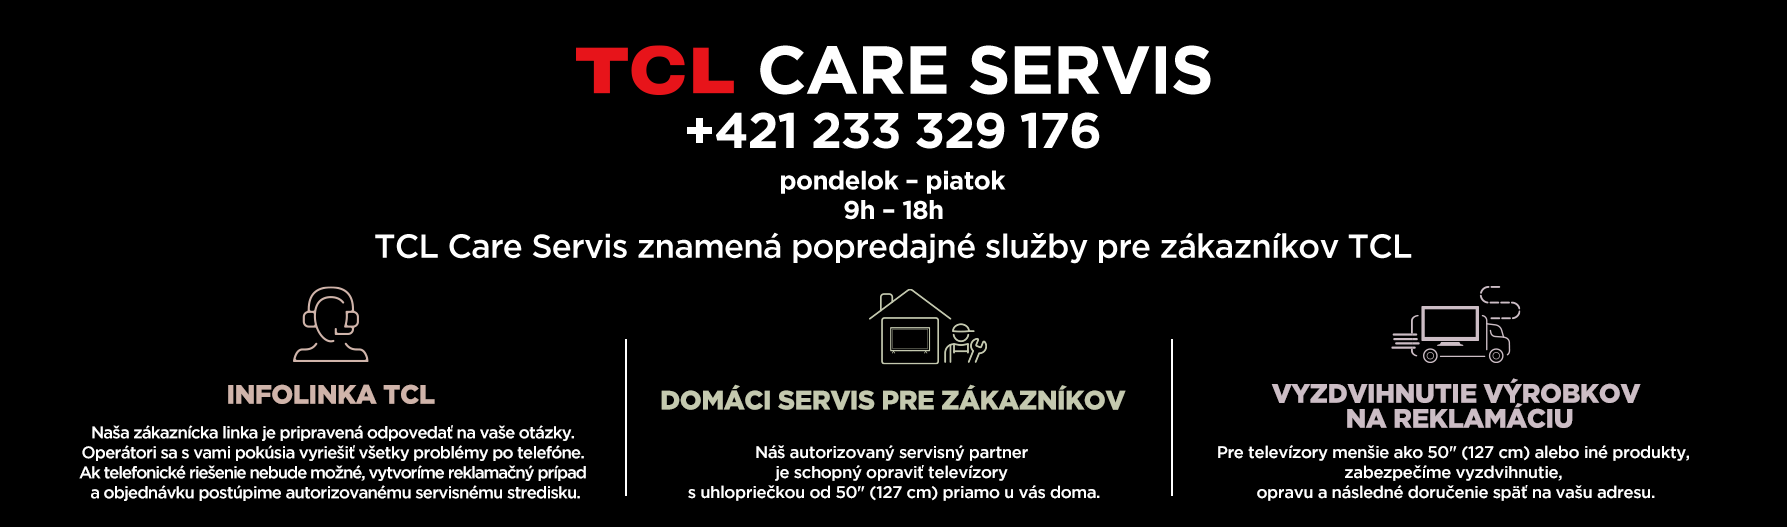 TCL_care_servis_black_SK_new_1708419471